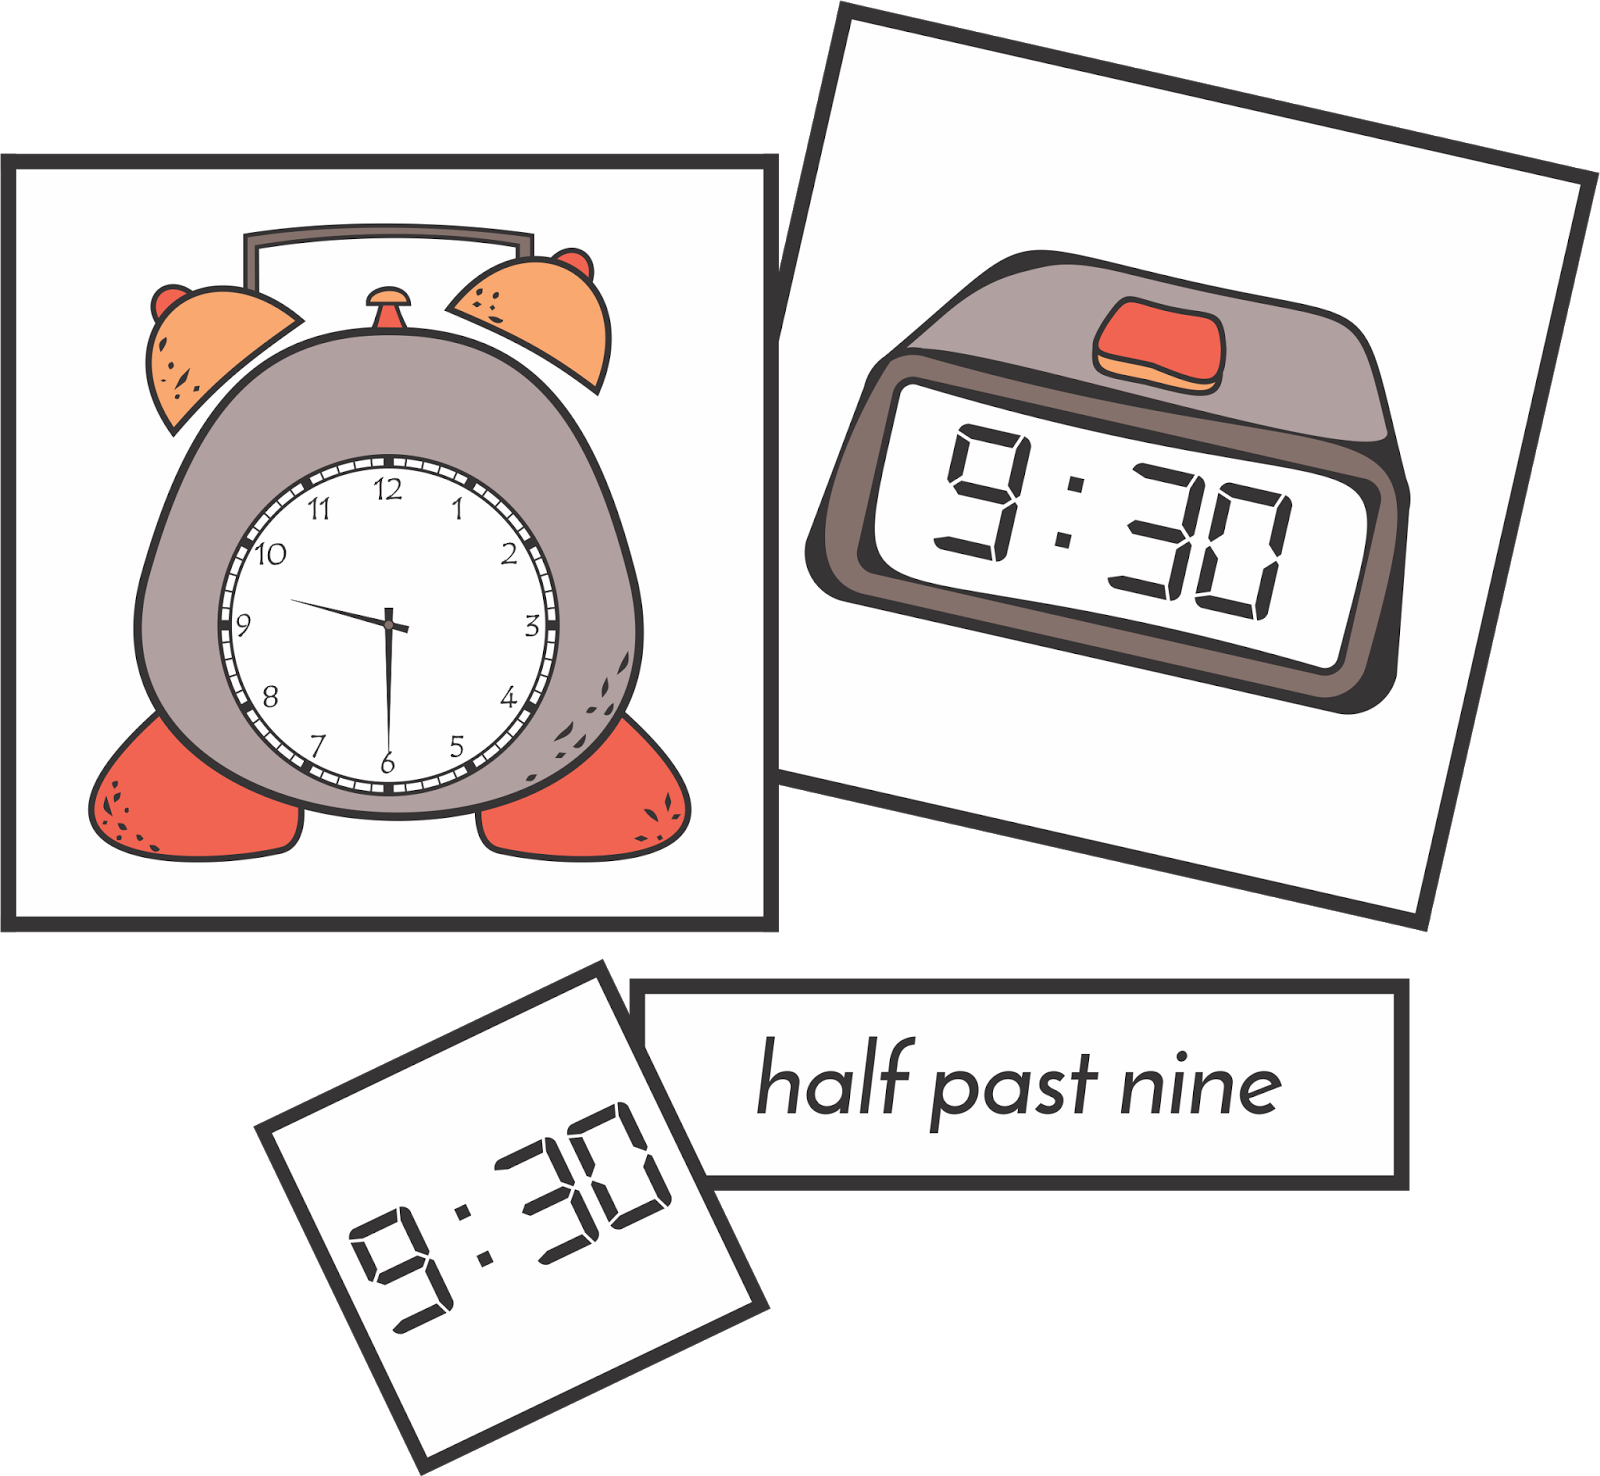 Telling time by the. Memory clipart fun times